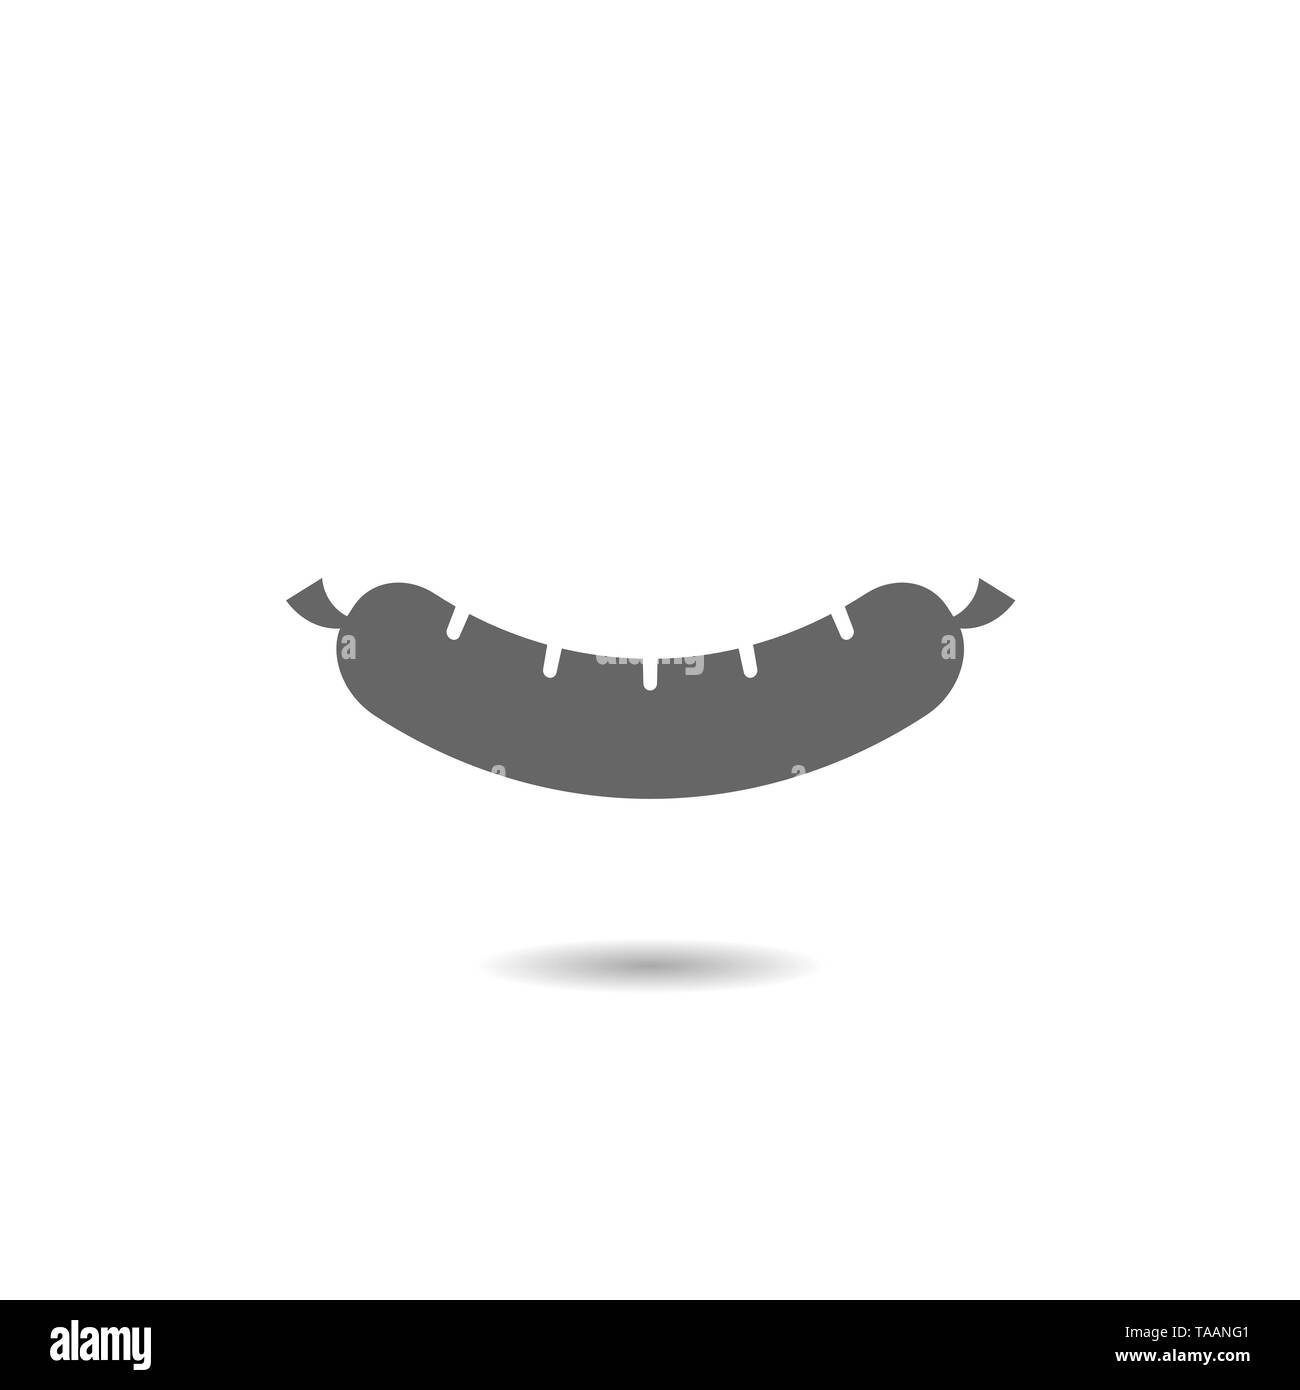 Sausage icon isolated. BBQ and barbecue concept symbol Stock Vector